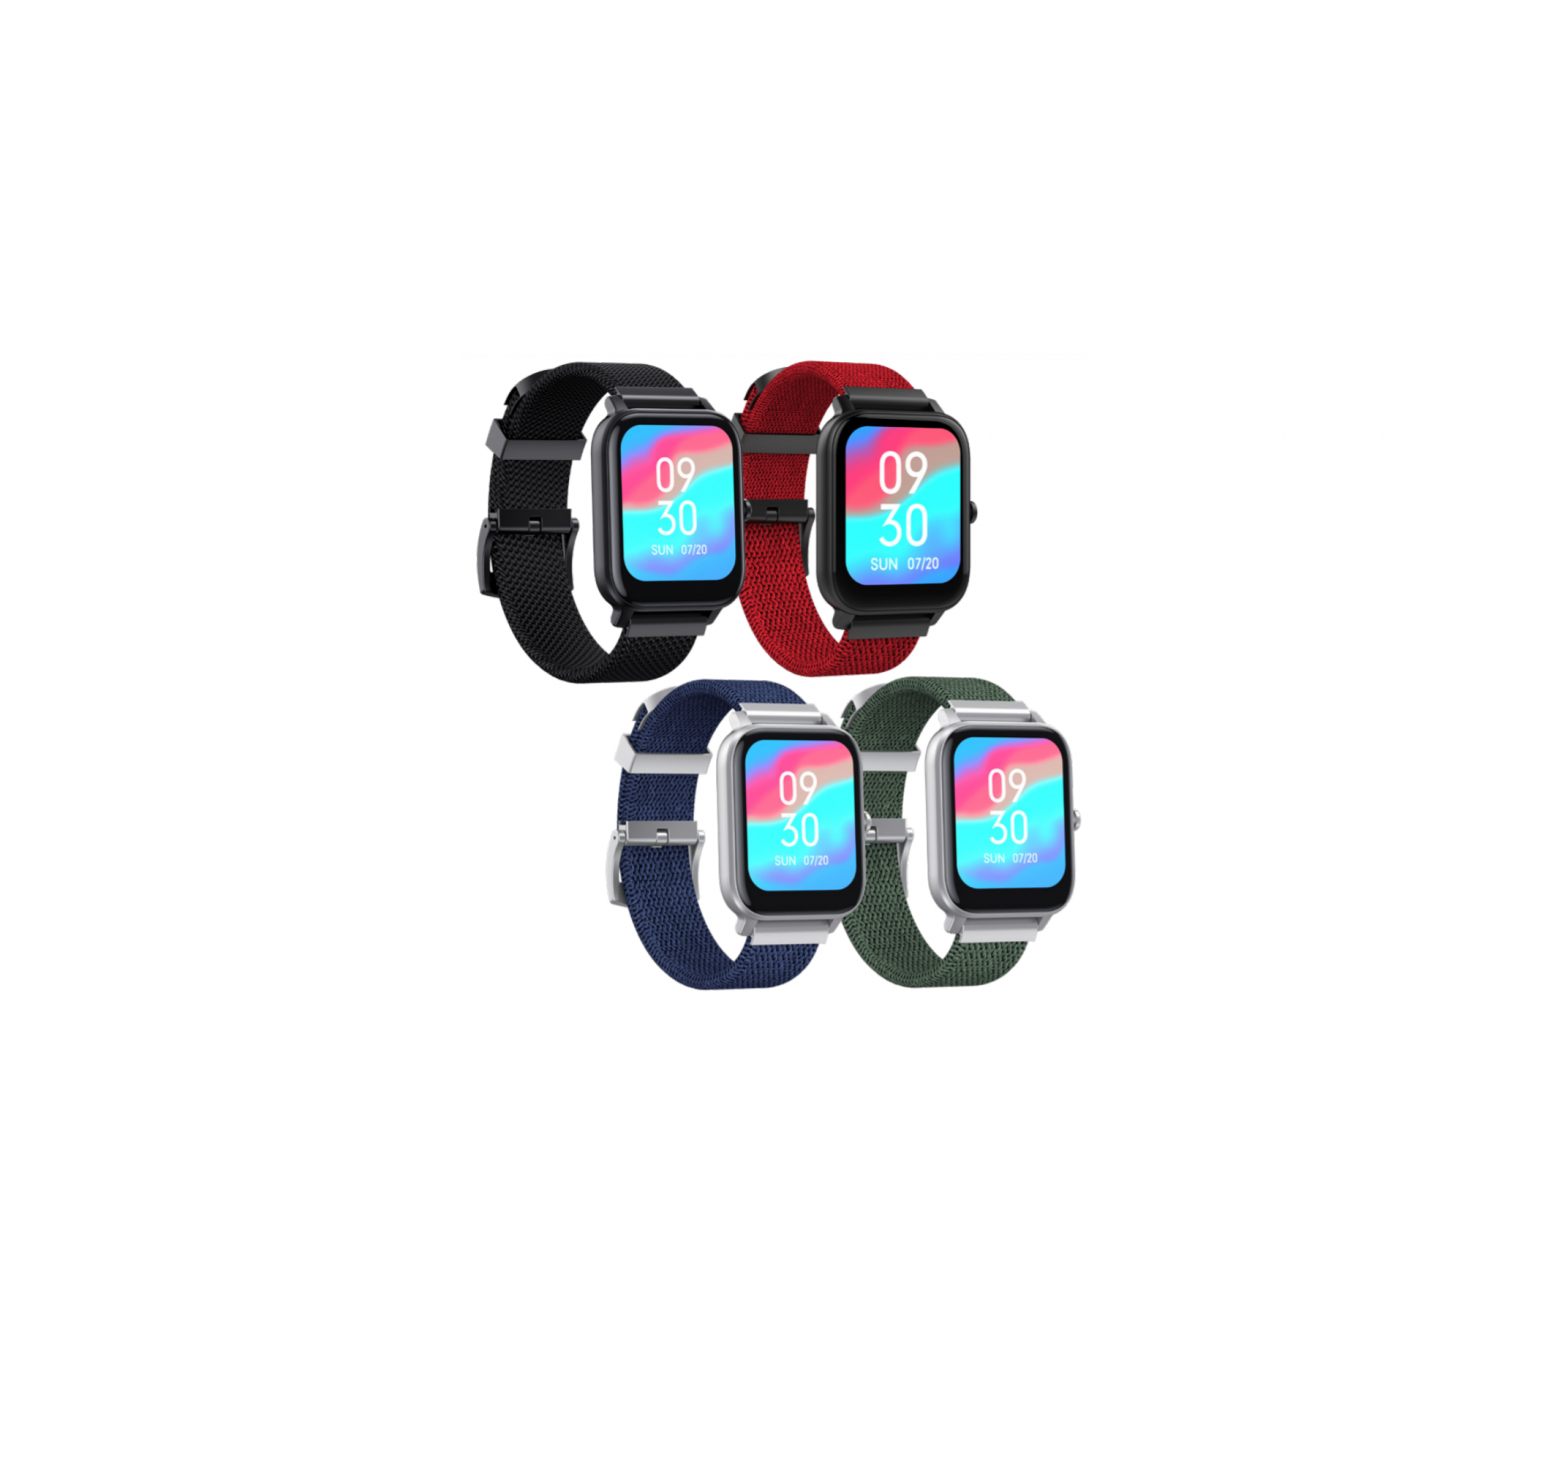 BAUHN Smart Watch with Interchangeable Straps User Guide